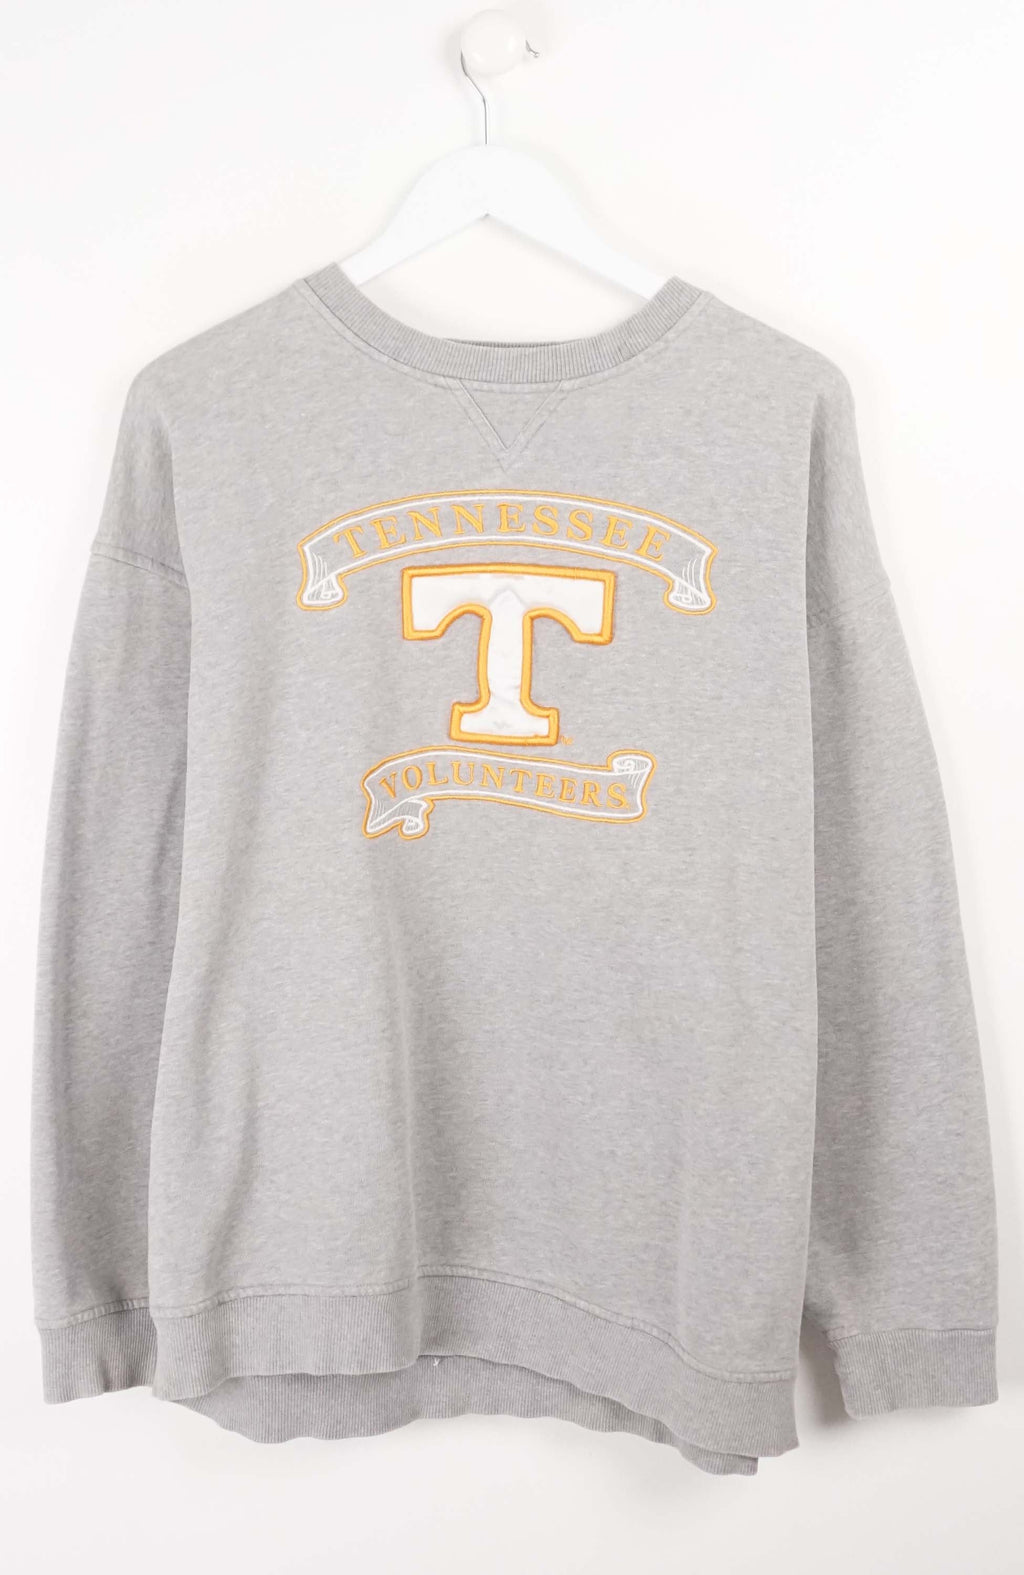 VINTAGE TENNESSEE SWEATER (L)